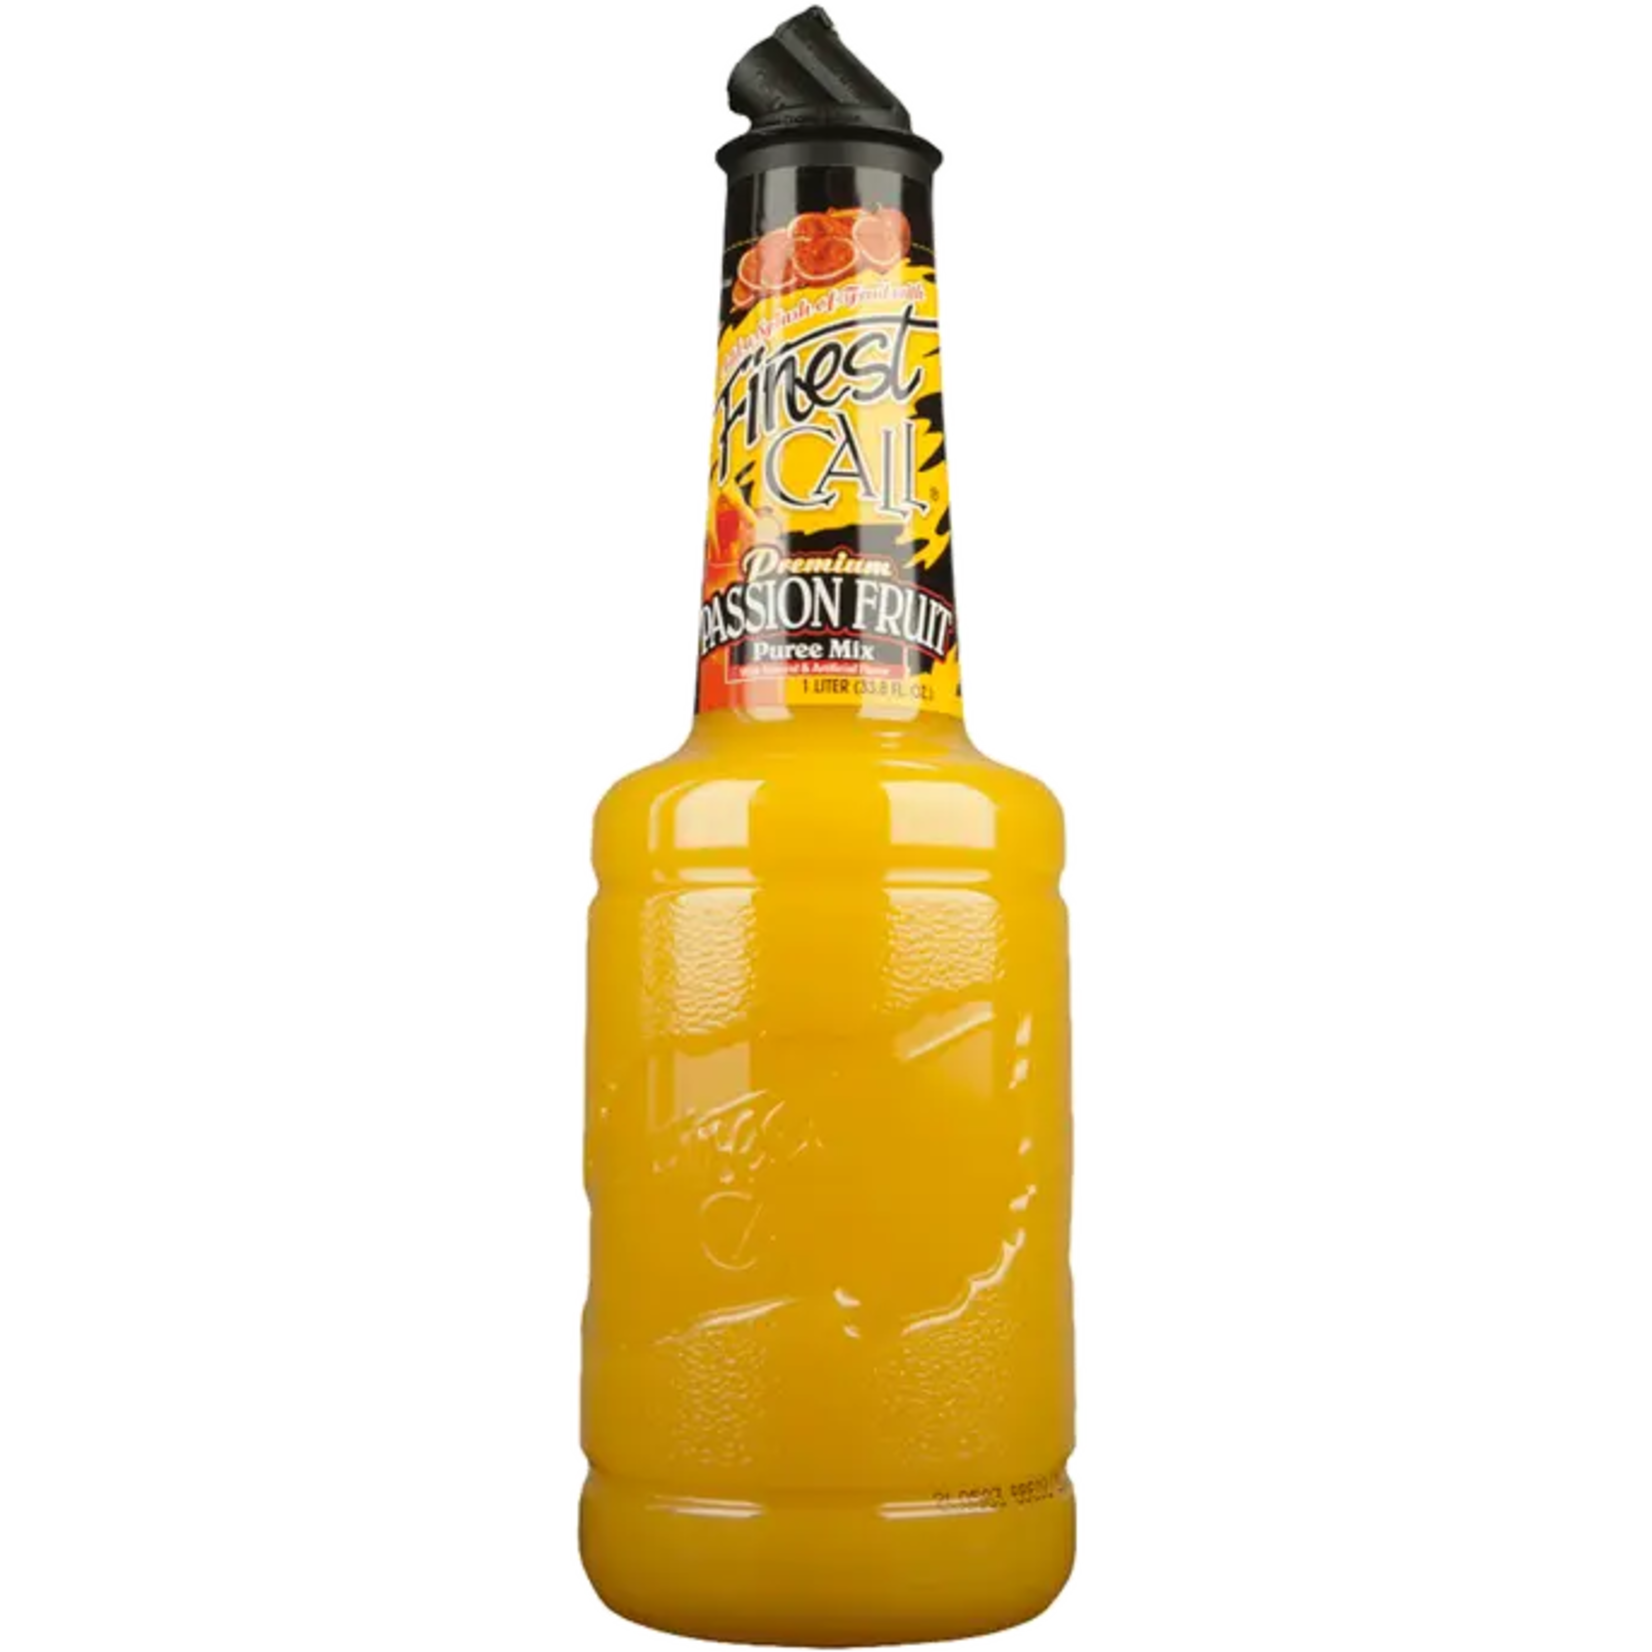 Finest Call Finest Call Passion Fruit Puree Mix 1 Ltr